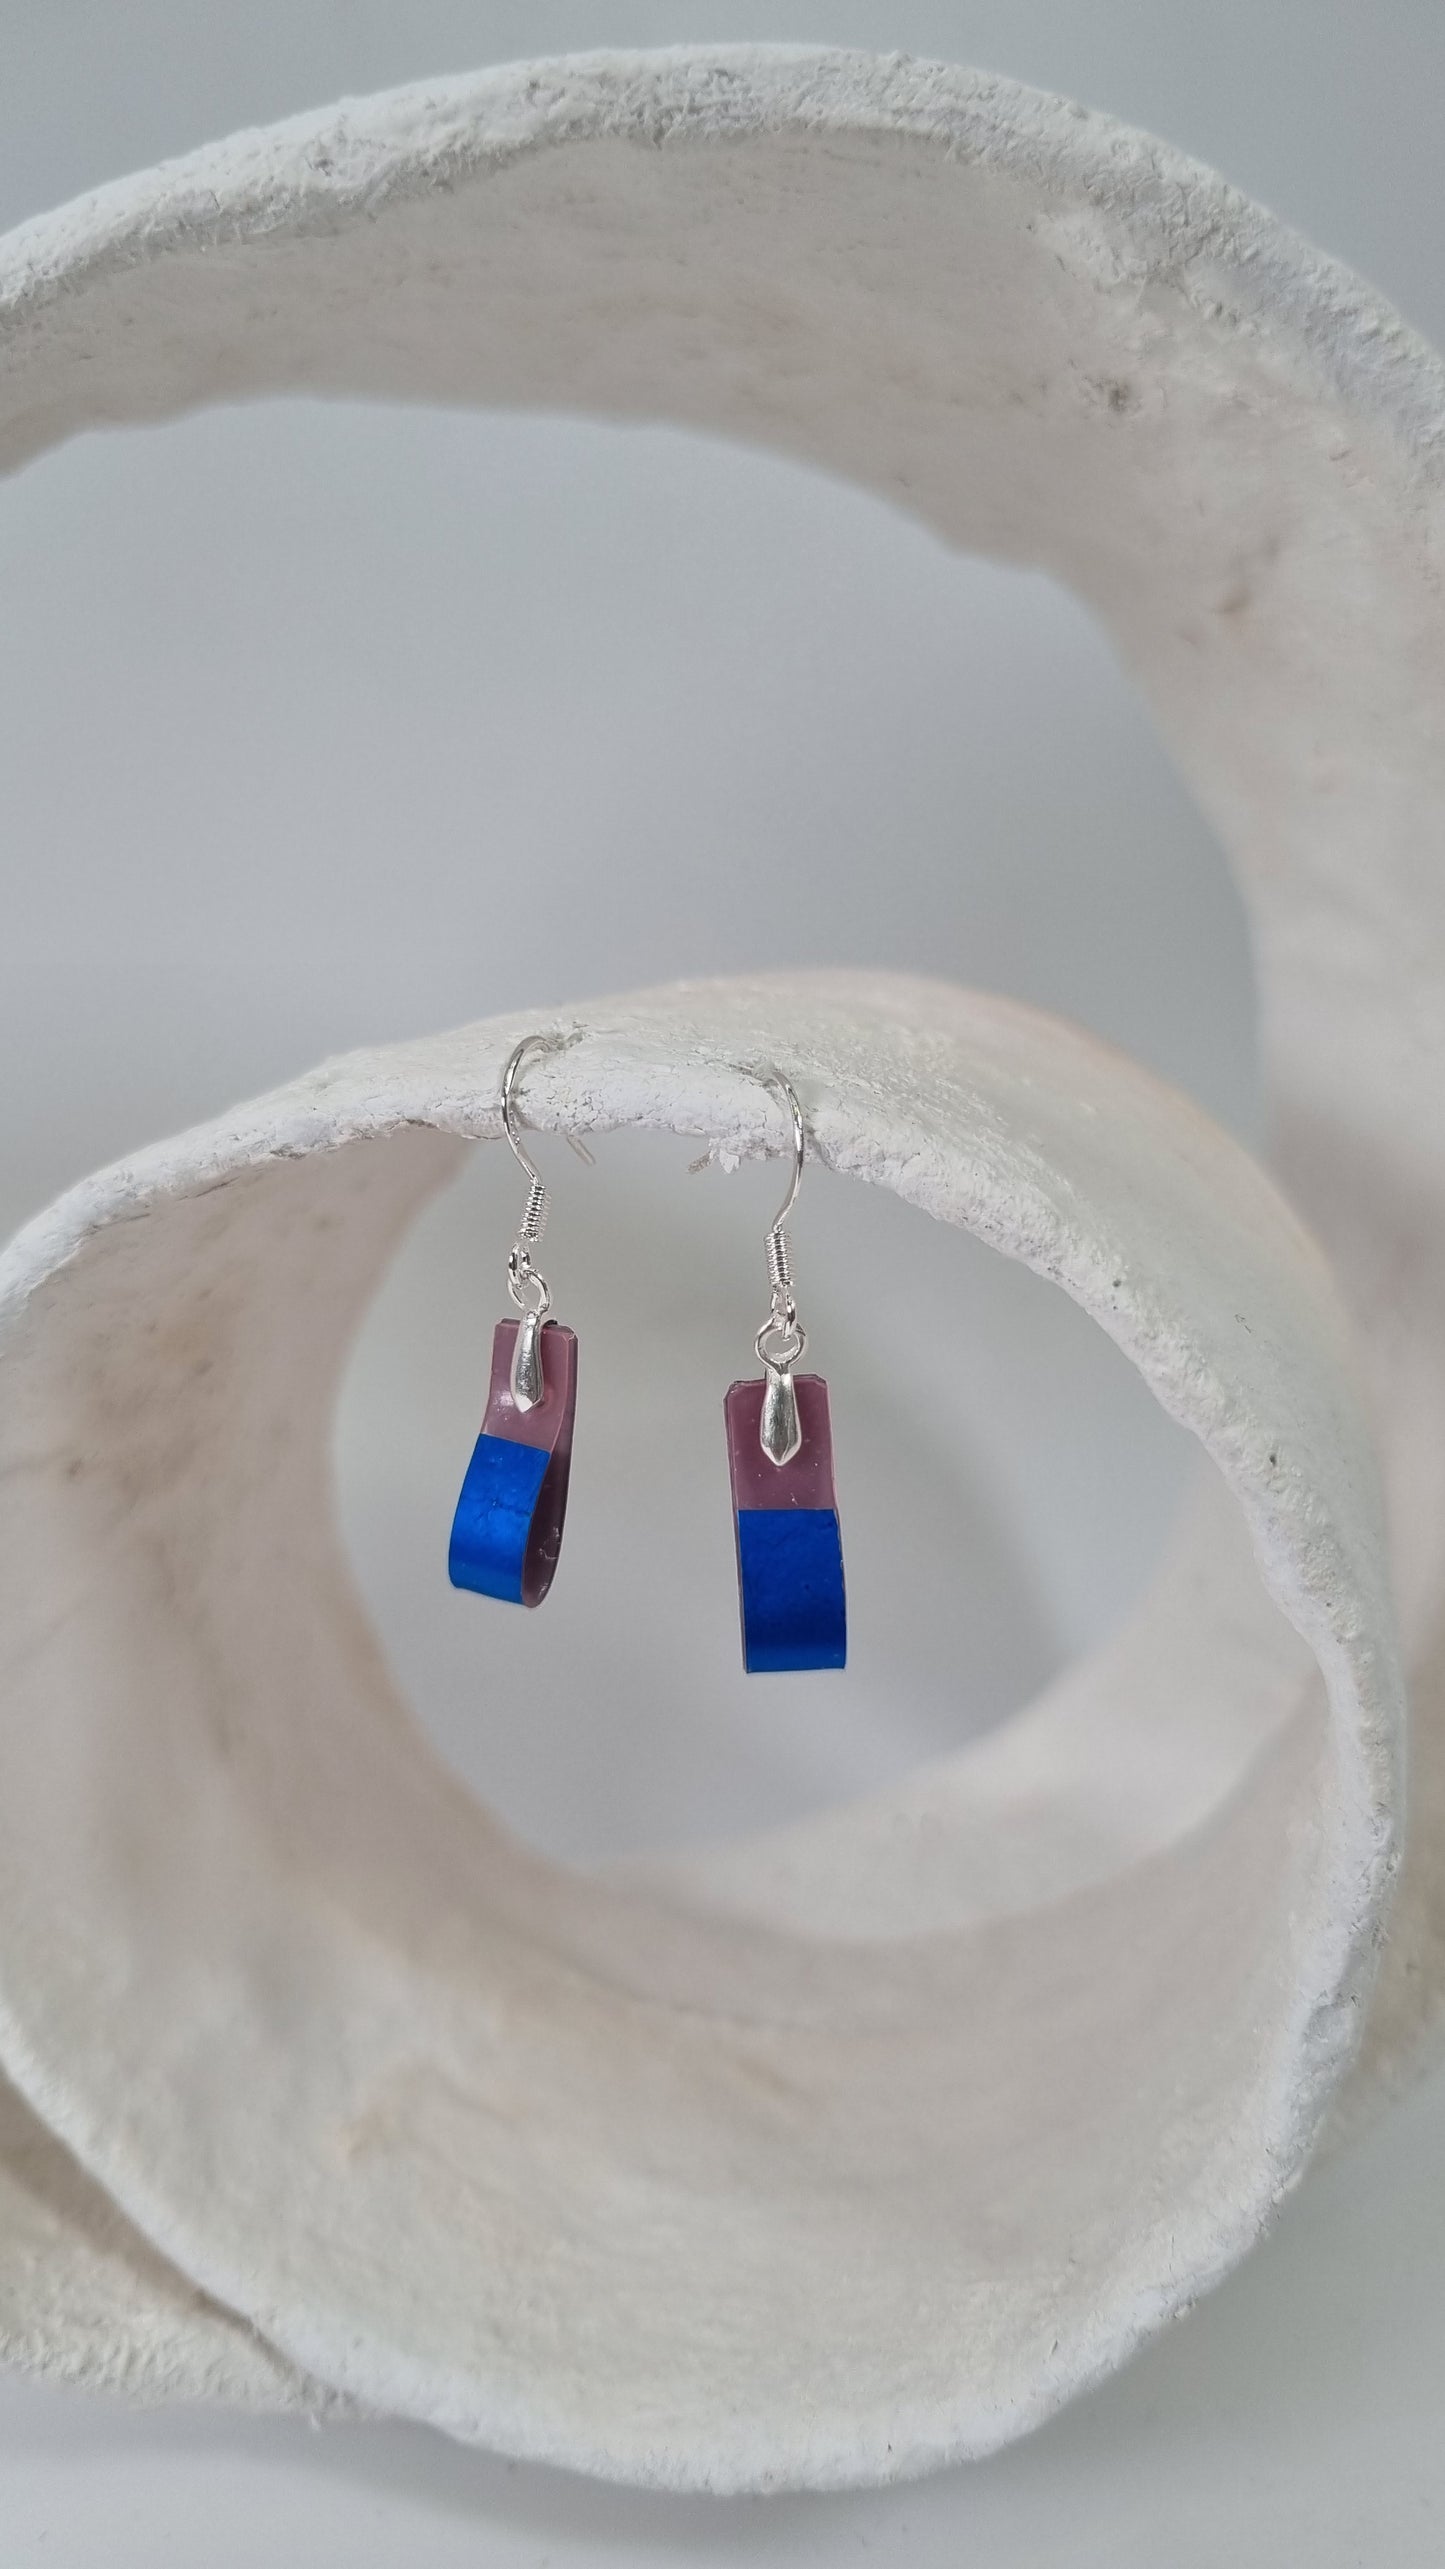 Tiny treasures folded metallic blue and pale pink earrings - PLASTIQUE By Siân